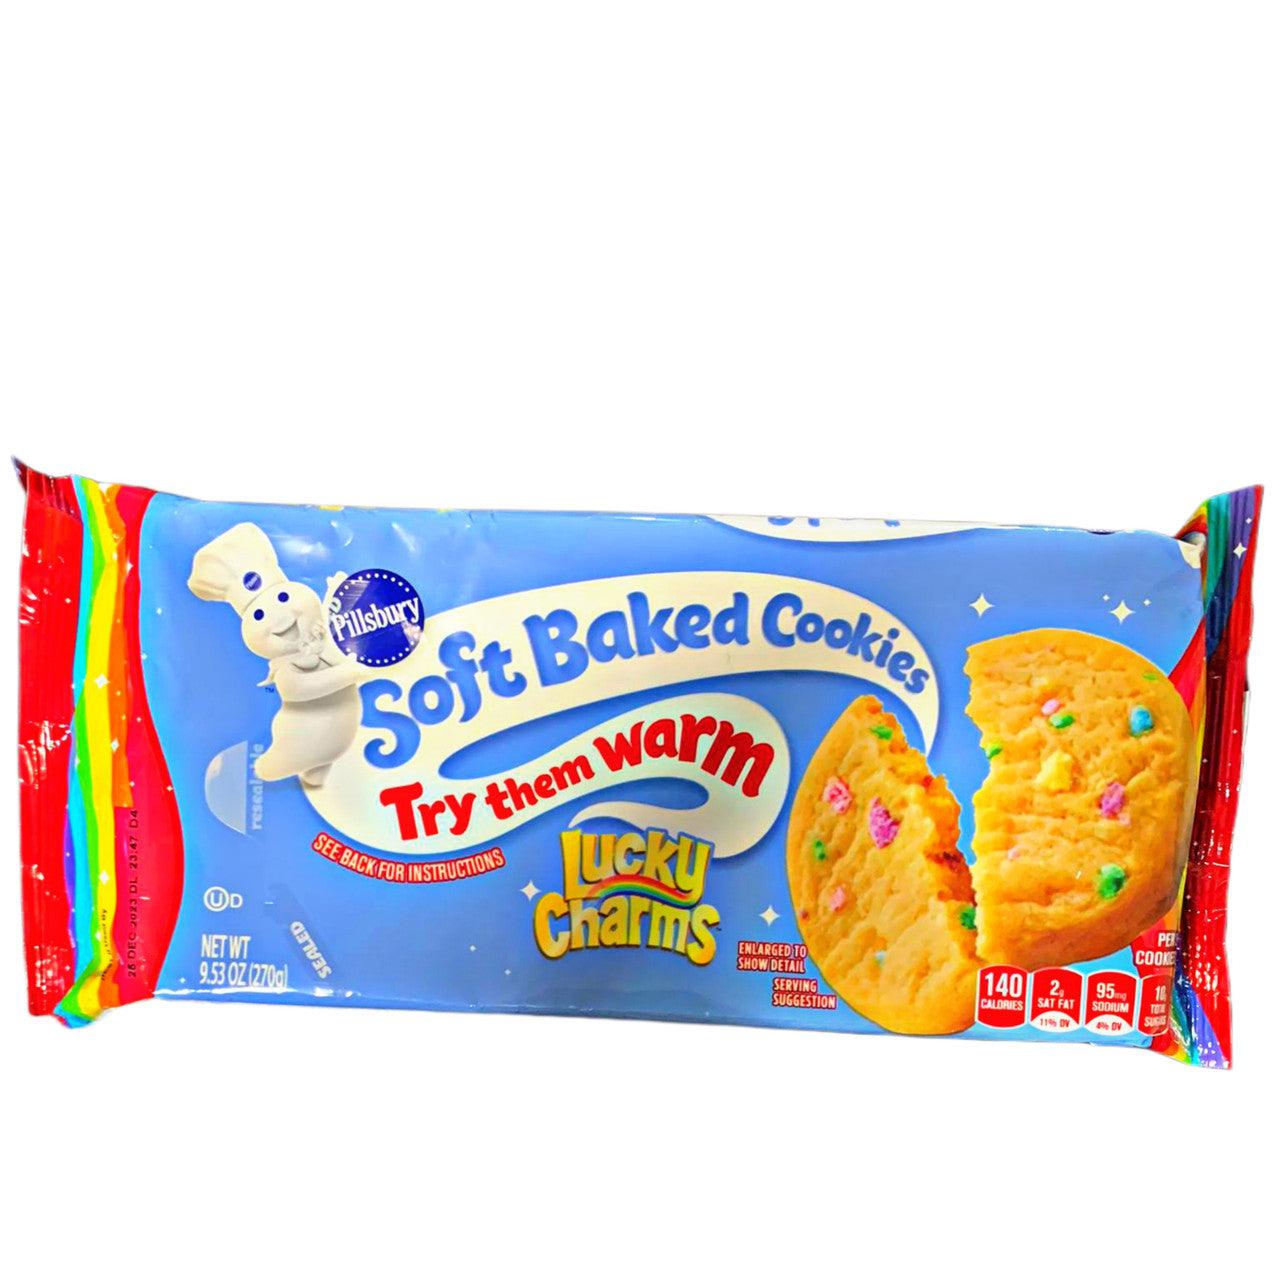 Pillsbury Soft Baked Cookies Lucky Charms - Extreme Snacks